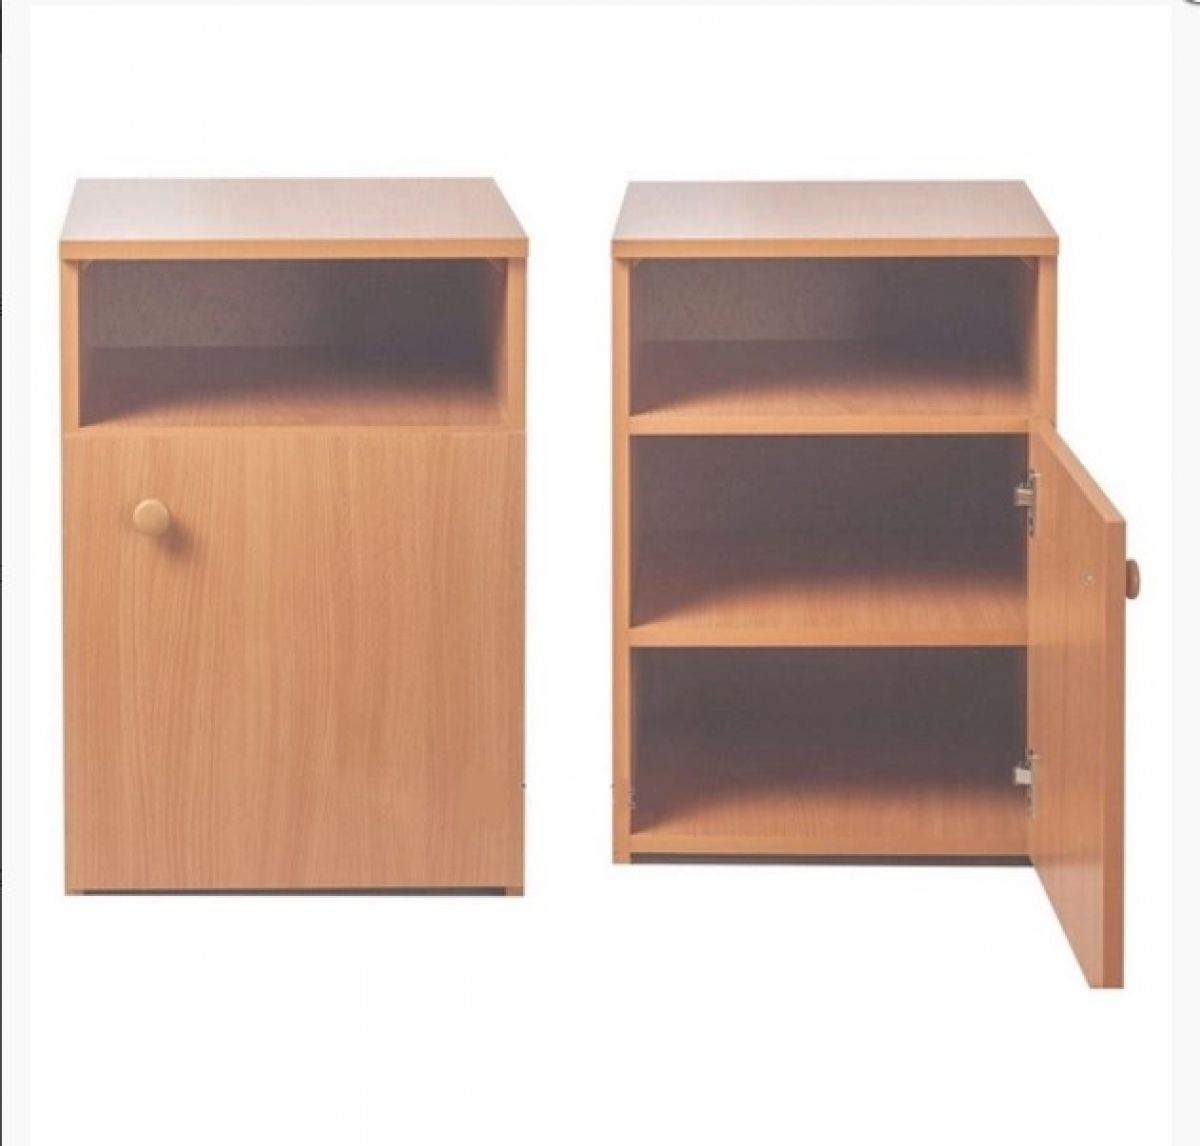 New bedside table 400*400*580 mm